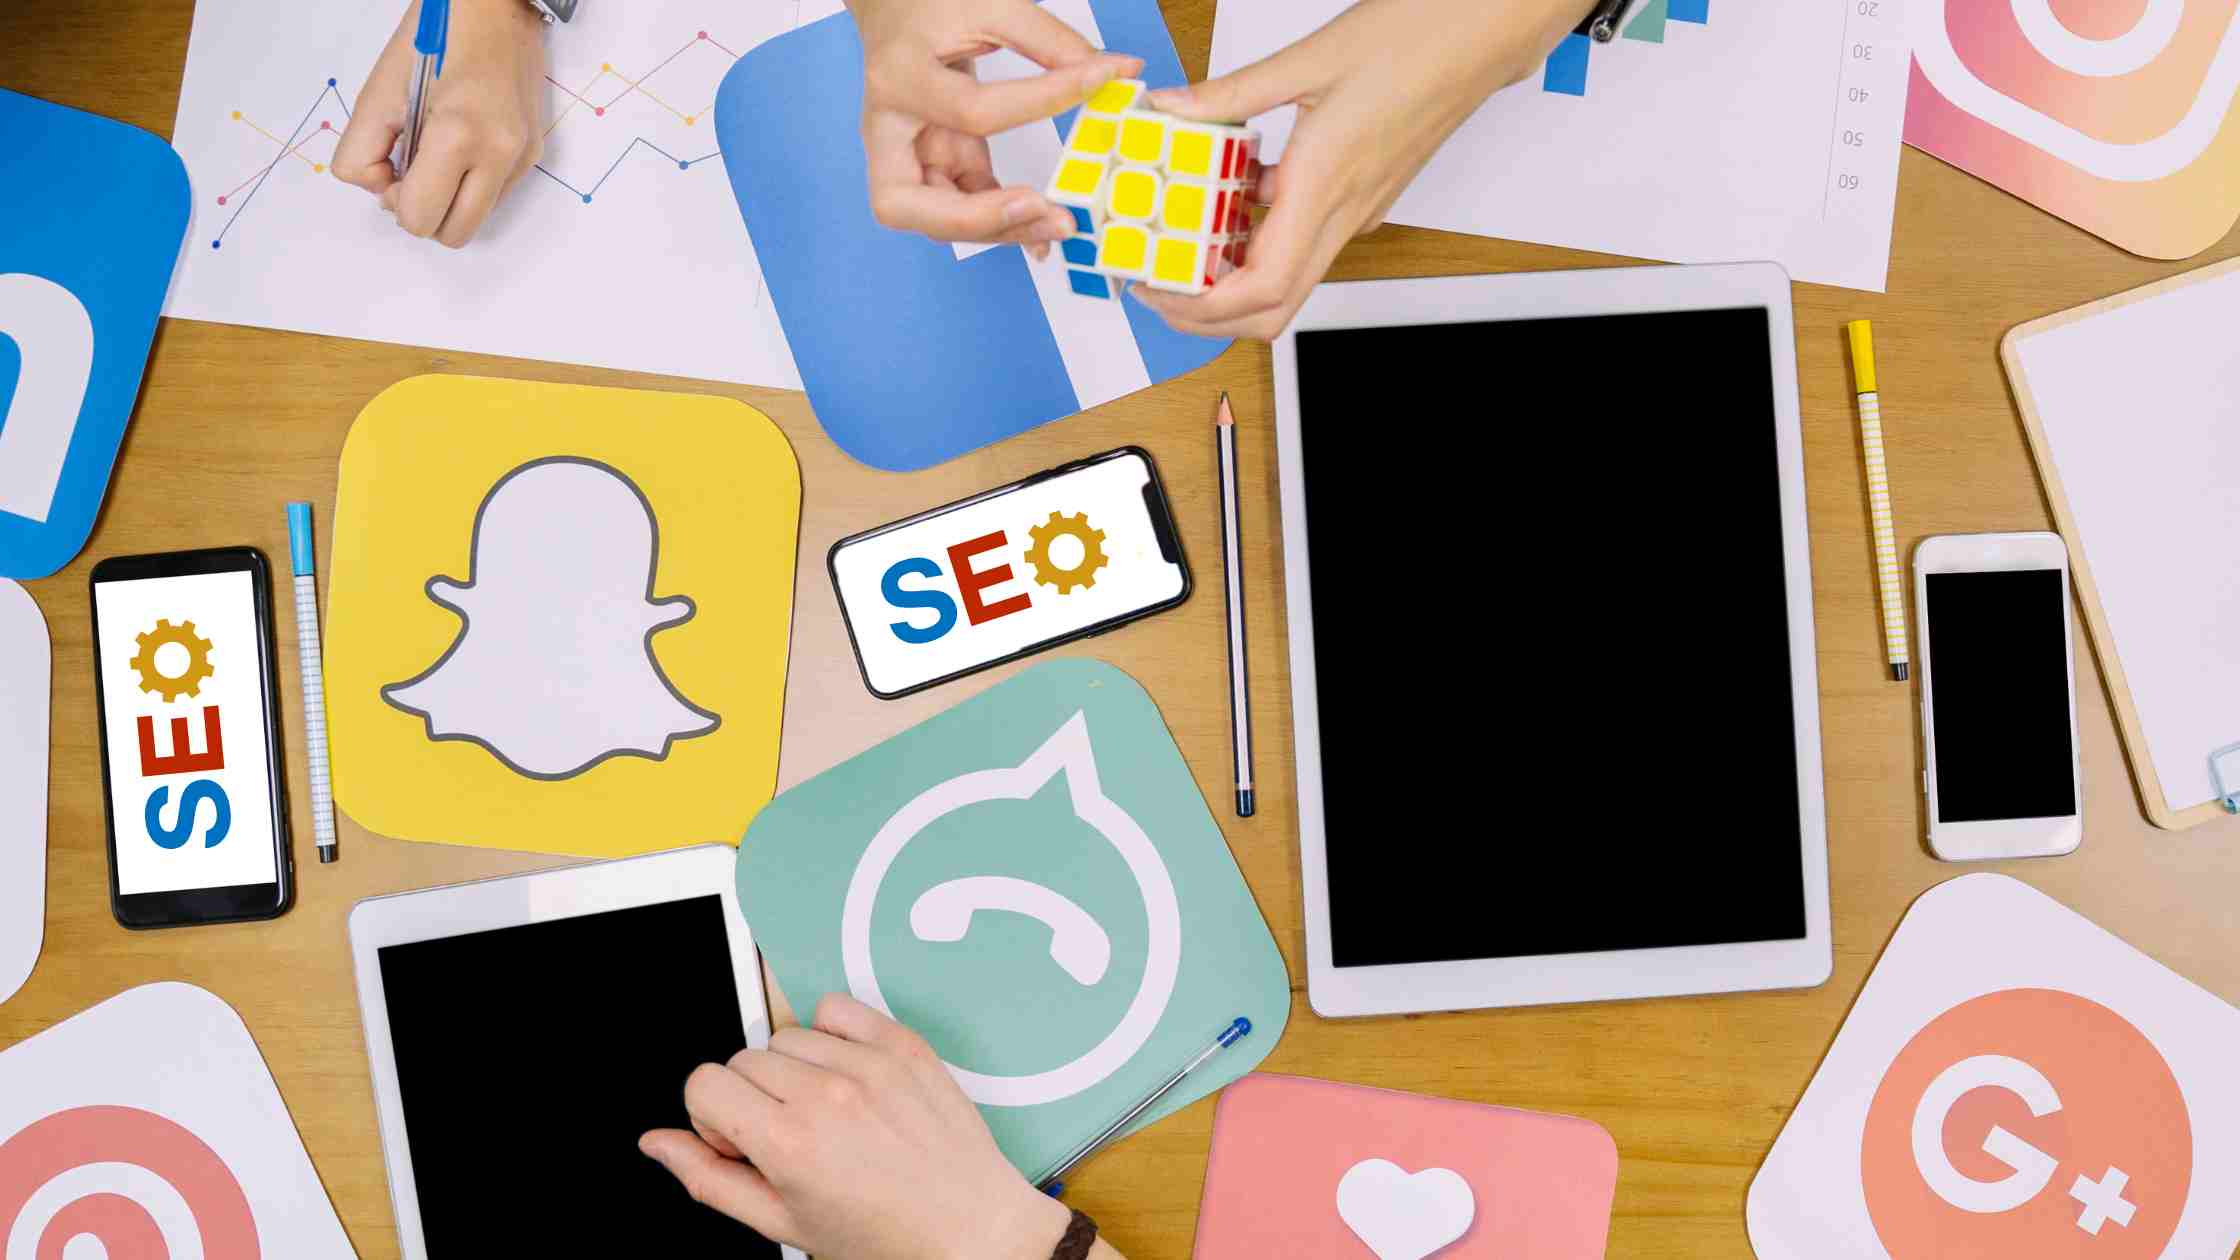 What is the relationship between social media and SEO